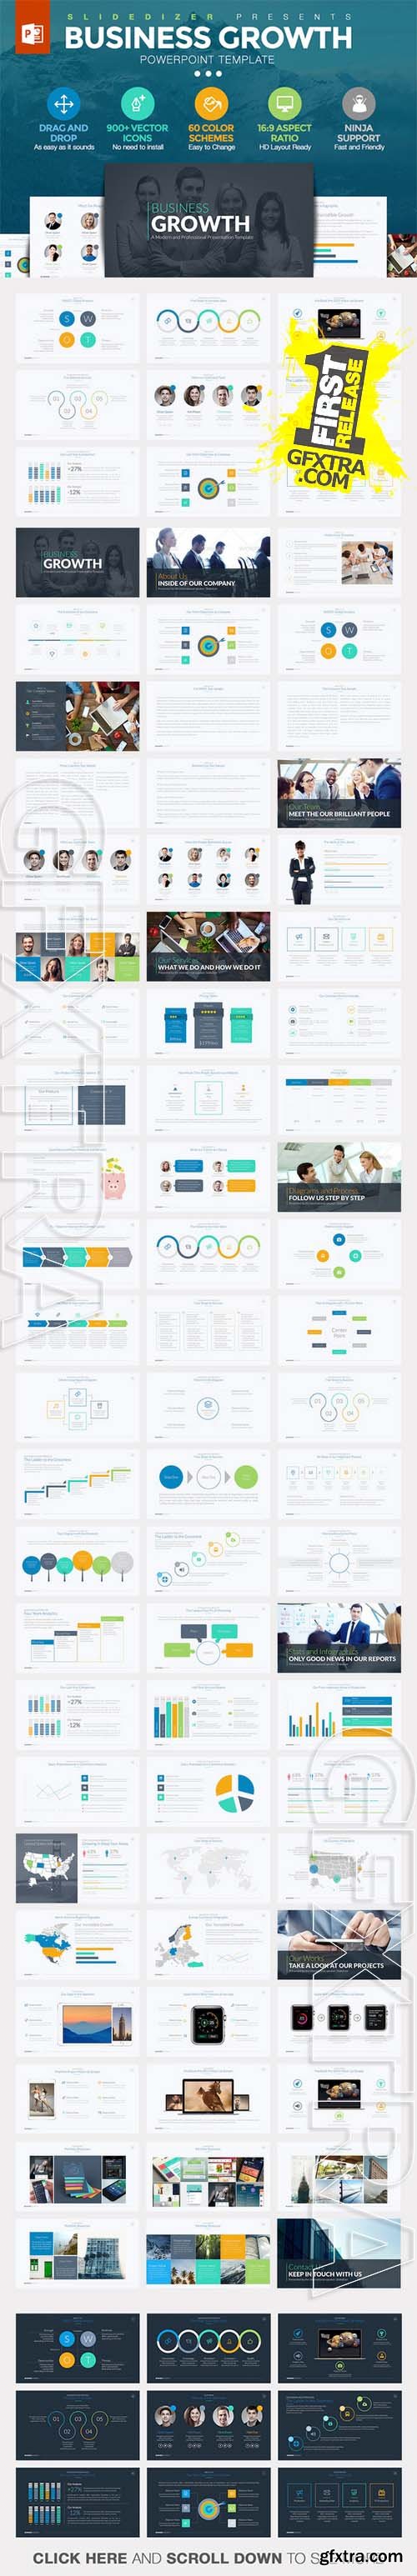 Business Growth Powerpoint Template - CM 291976